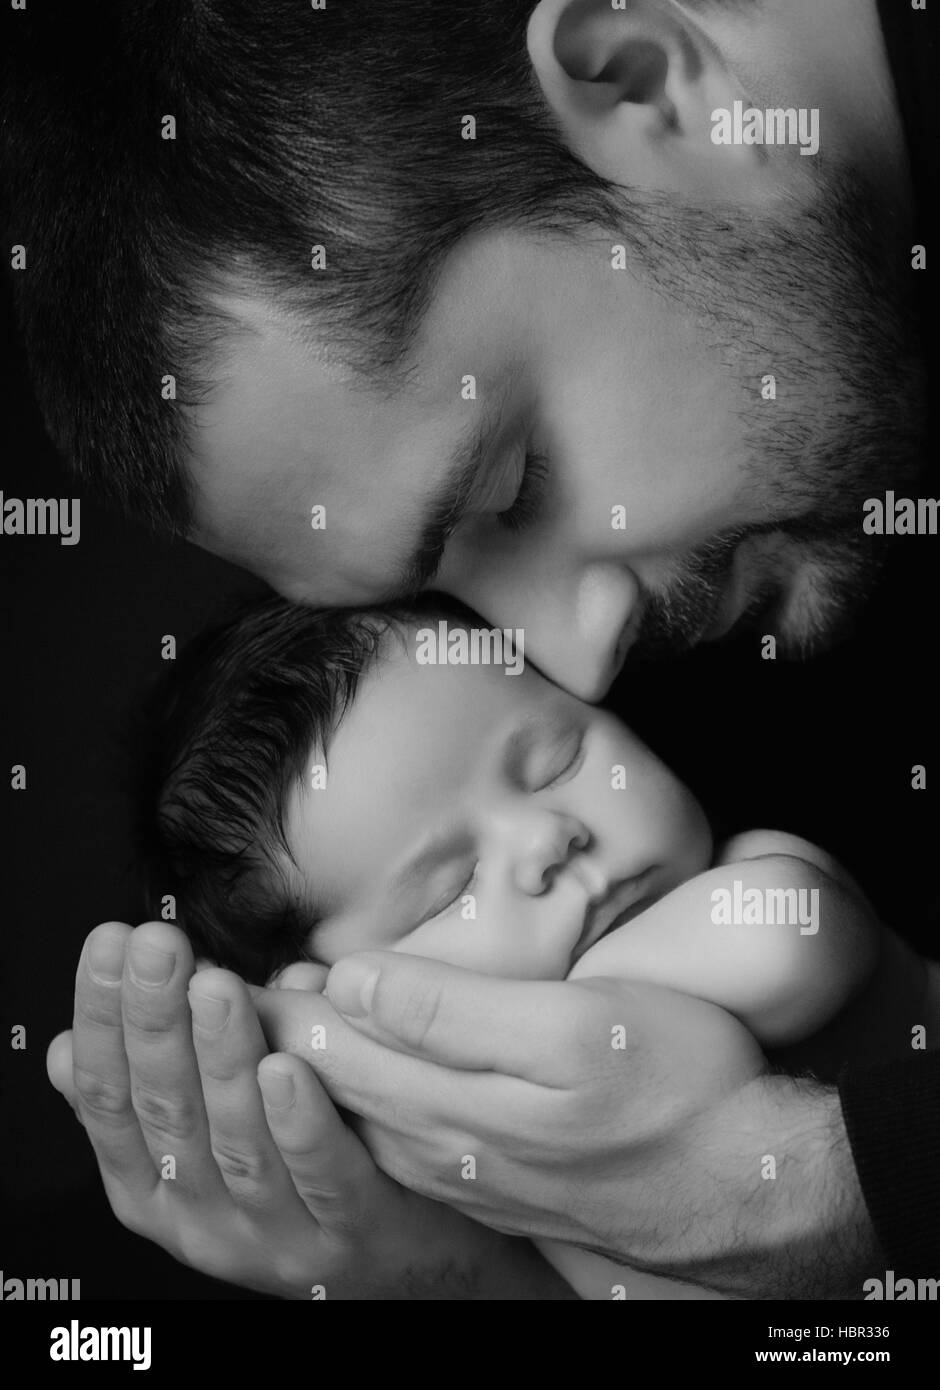 Daddy Hugs His Newborn Baby Father S Love Close Up Portrait On A Black Background Stock Photo Alamy